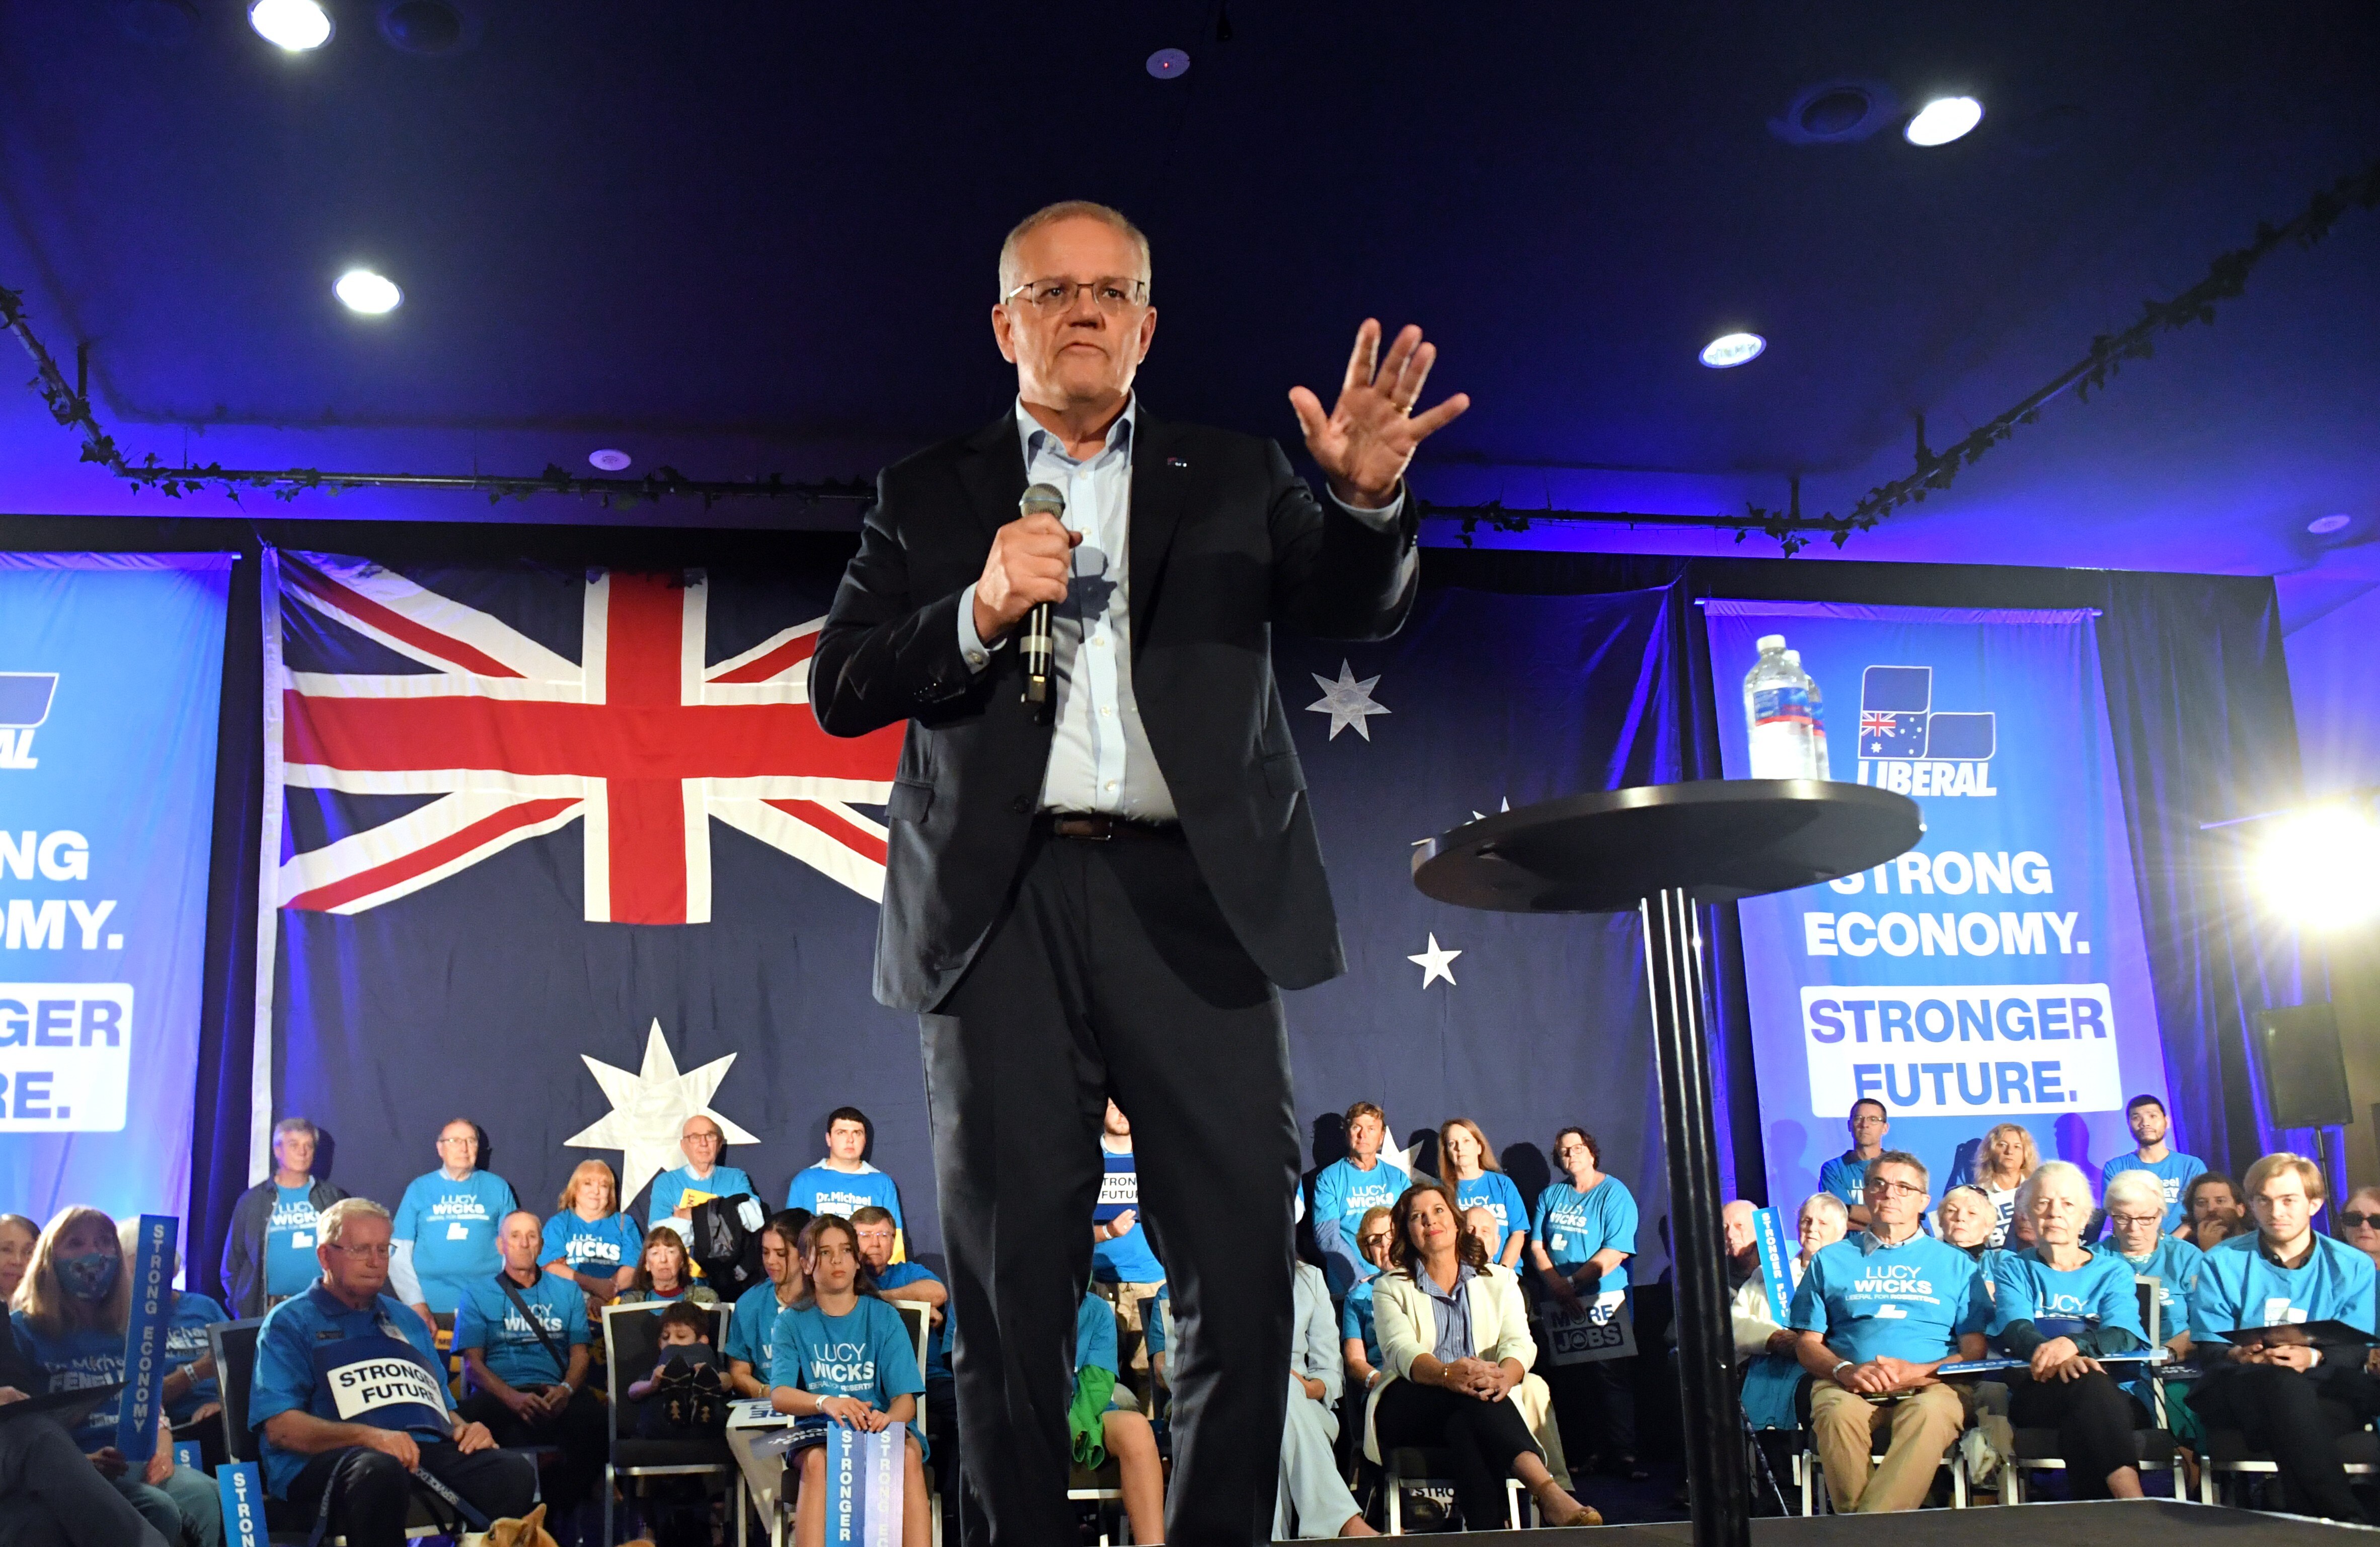 Prime Minister Scott Morrison at a Liberal Party rally on Day 13 of the 2022 federal election campaign, at Tumbi Umbi, on the NSW Central Coast, in the seat of Dobell. Saturday, April 23, 2022. (AAP Image/Mick Tsikas) NO ARCHIVING